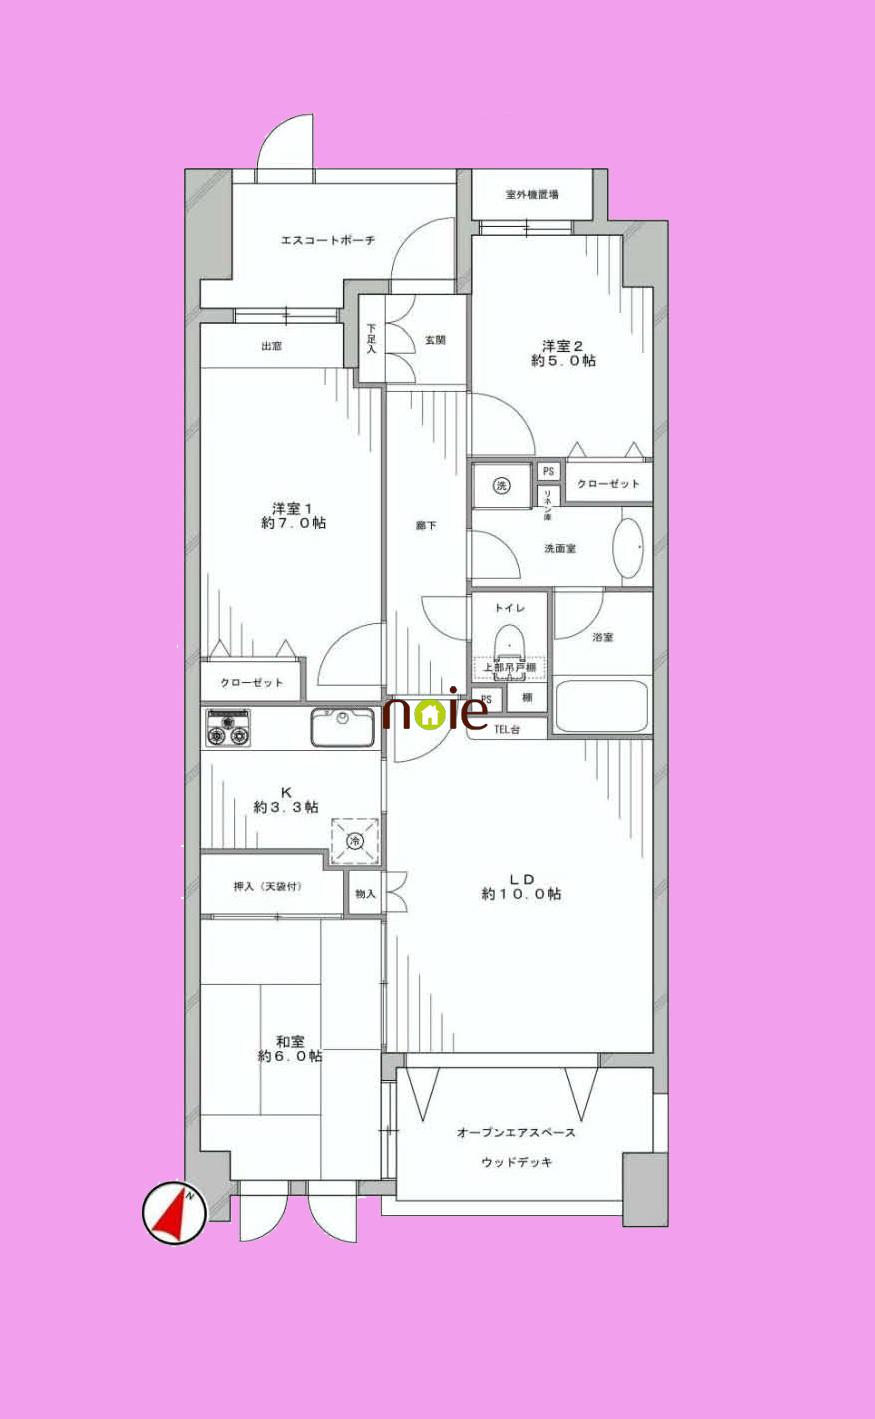 Floor plan. 3LDK, Price 34,980,000 yen, Occupied area 70.25 sq m , Balcony area 7 sq m   ■  ~ In fact, please check ~  ◆ New renovation ~ Fit renovation ~ After-sales service guarantee ~  ~ Immediately possible to new life ~  ◆ Spacious grounds of the big community ◆ Life convenience location ◆ Multiple routes are available